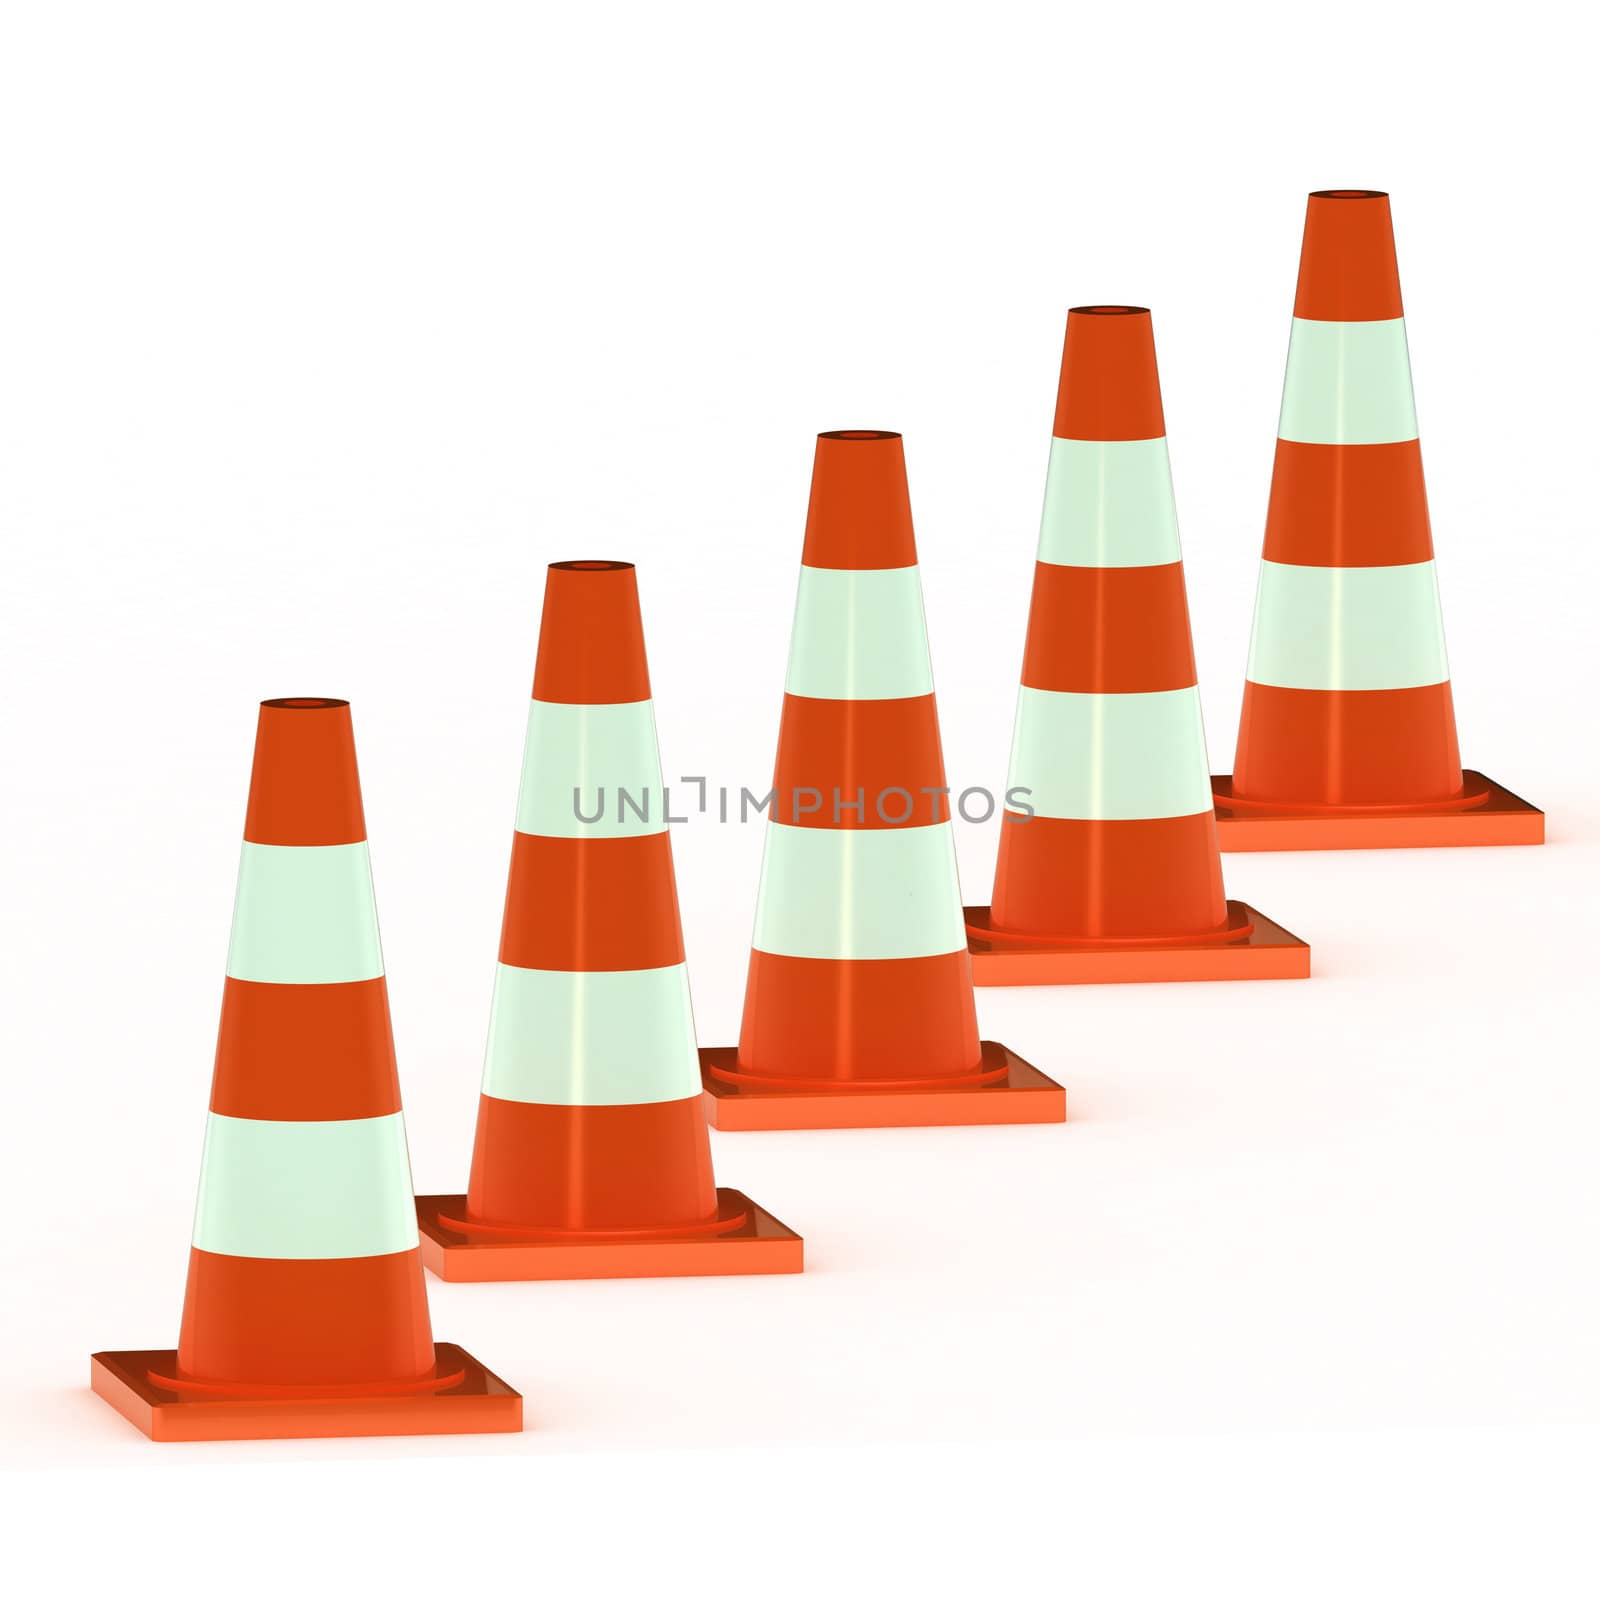 A Colourful 3d Rendered Traffic Cone Illustration